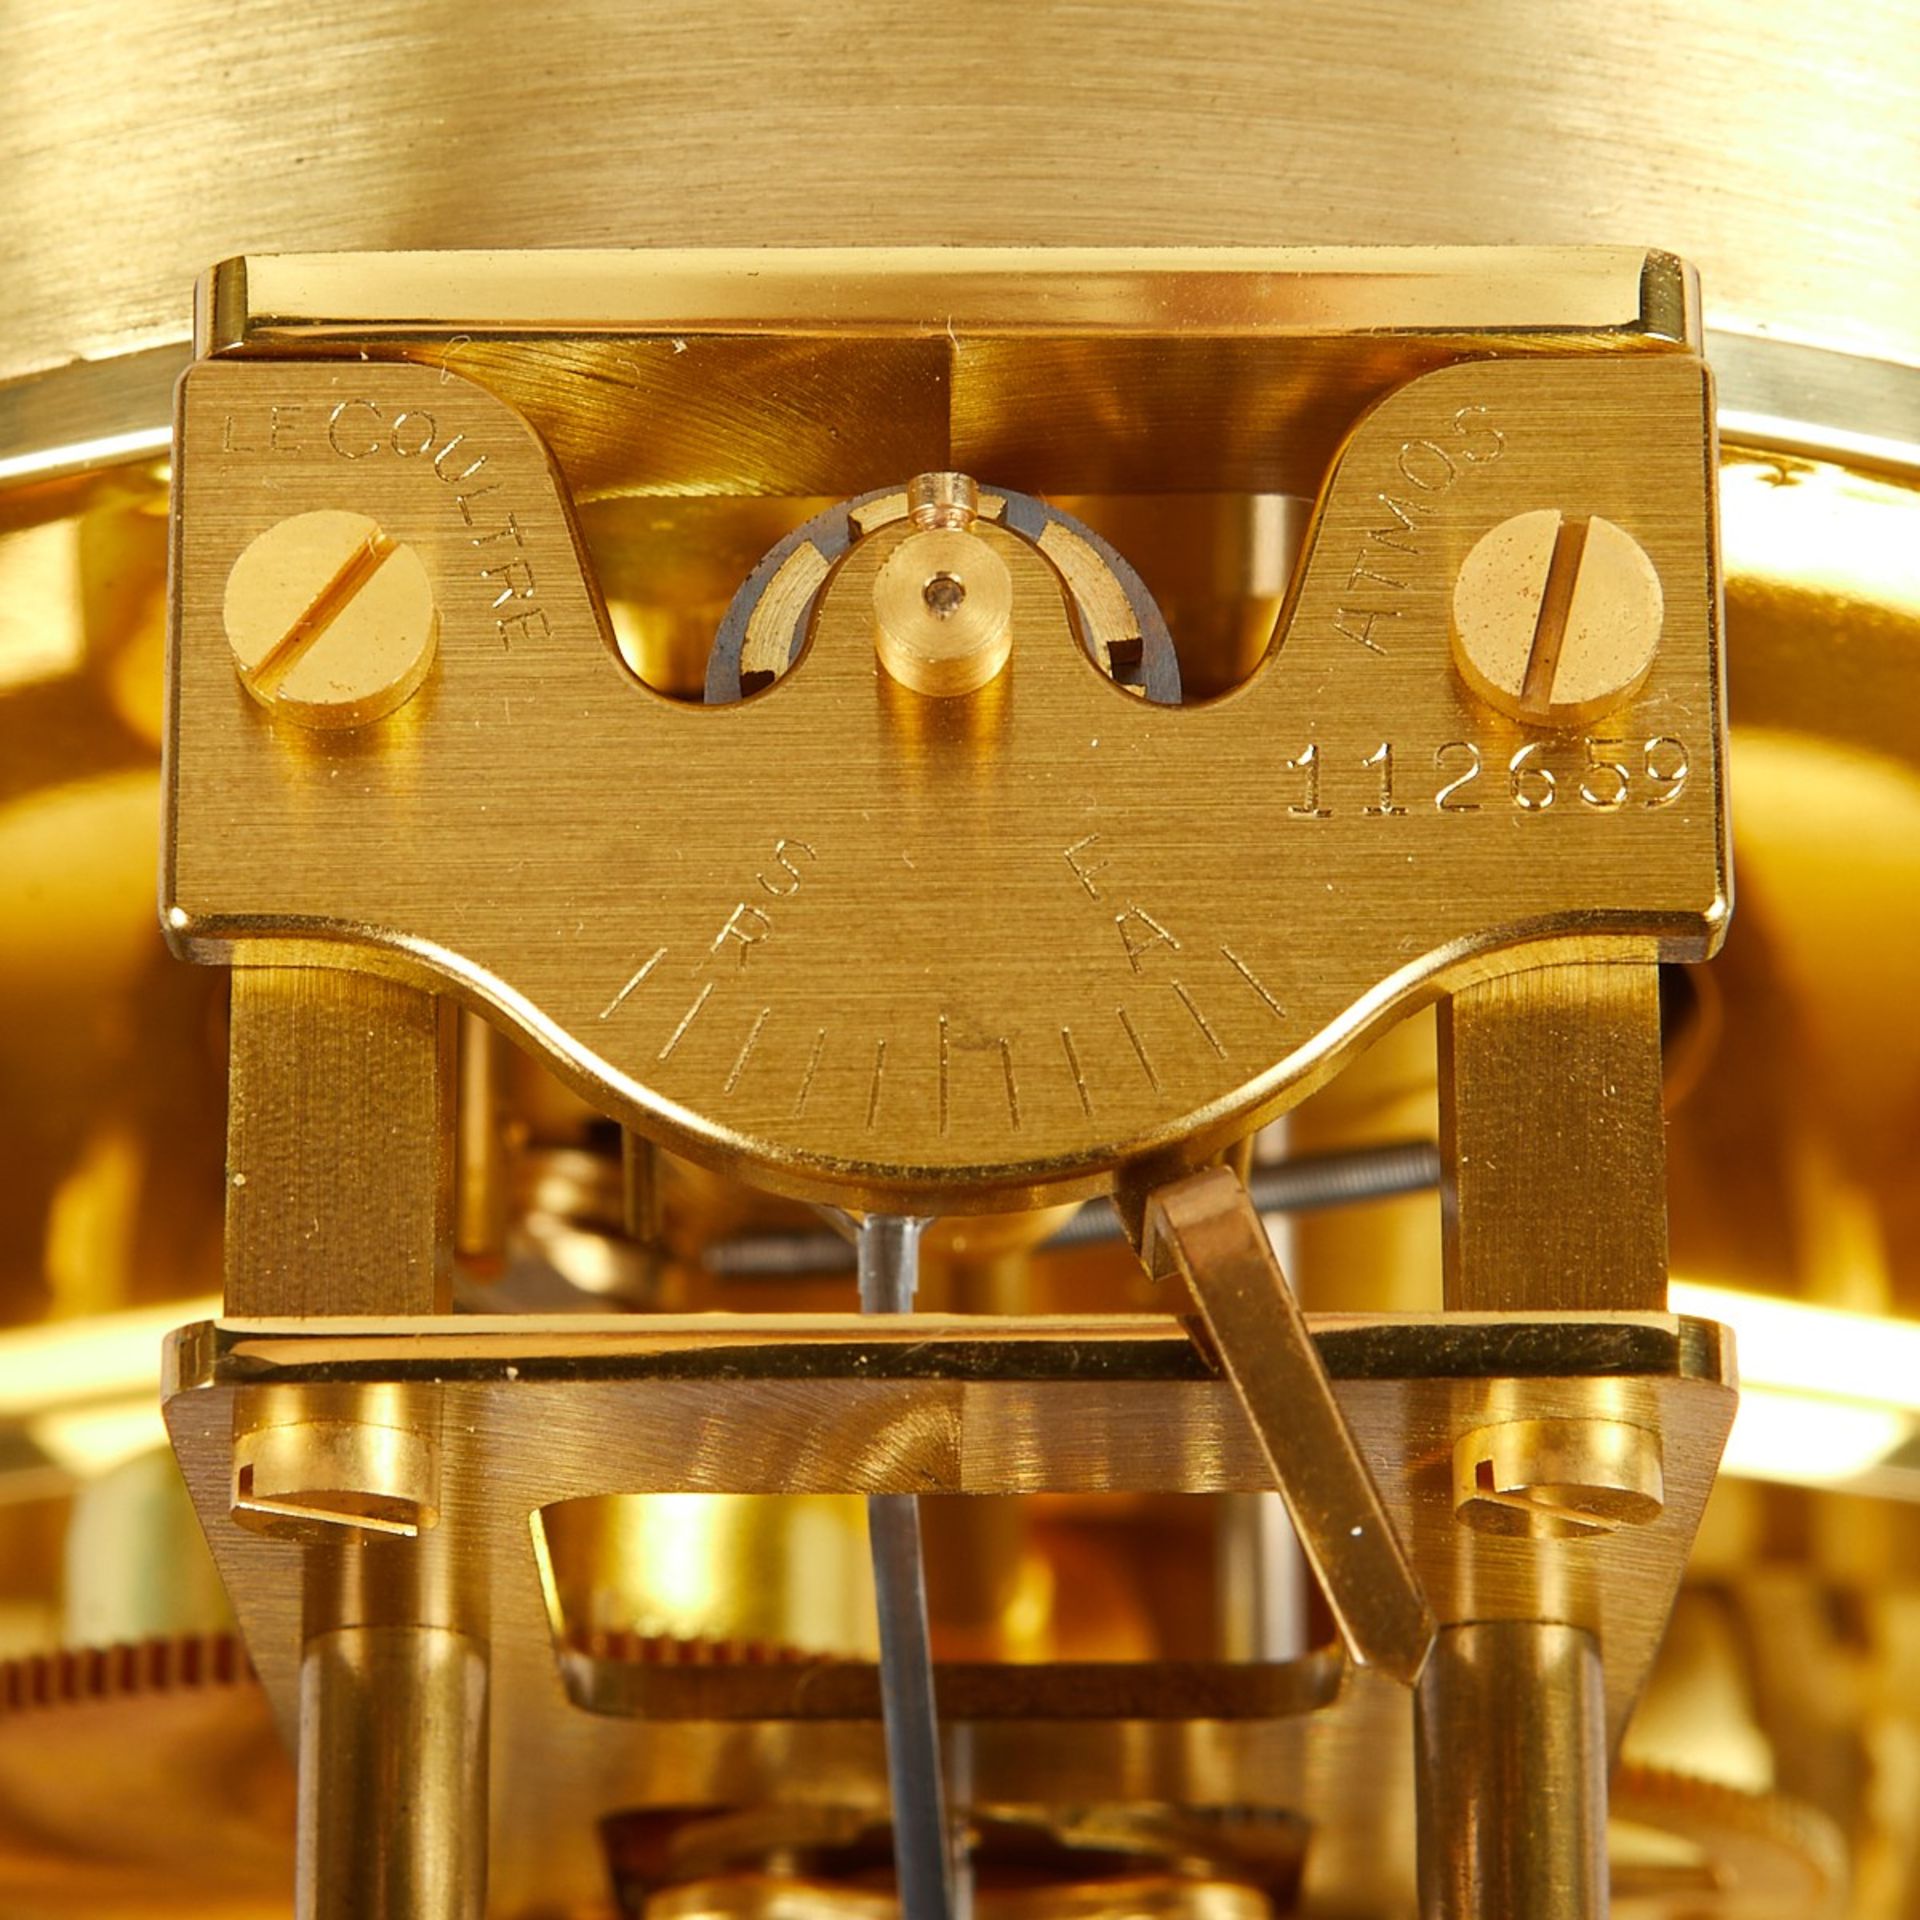 Jaeger LeCoultre Gold Atmos Table Clock - Image 7 of 7